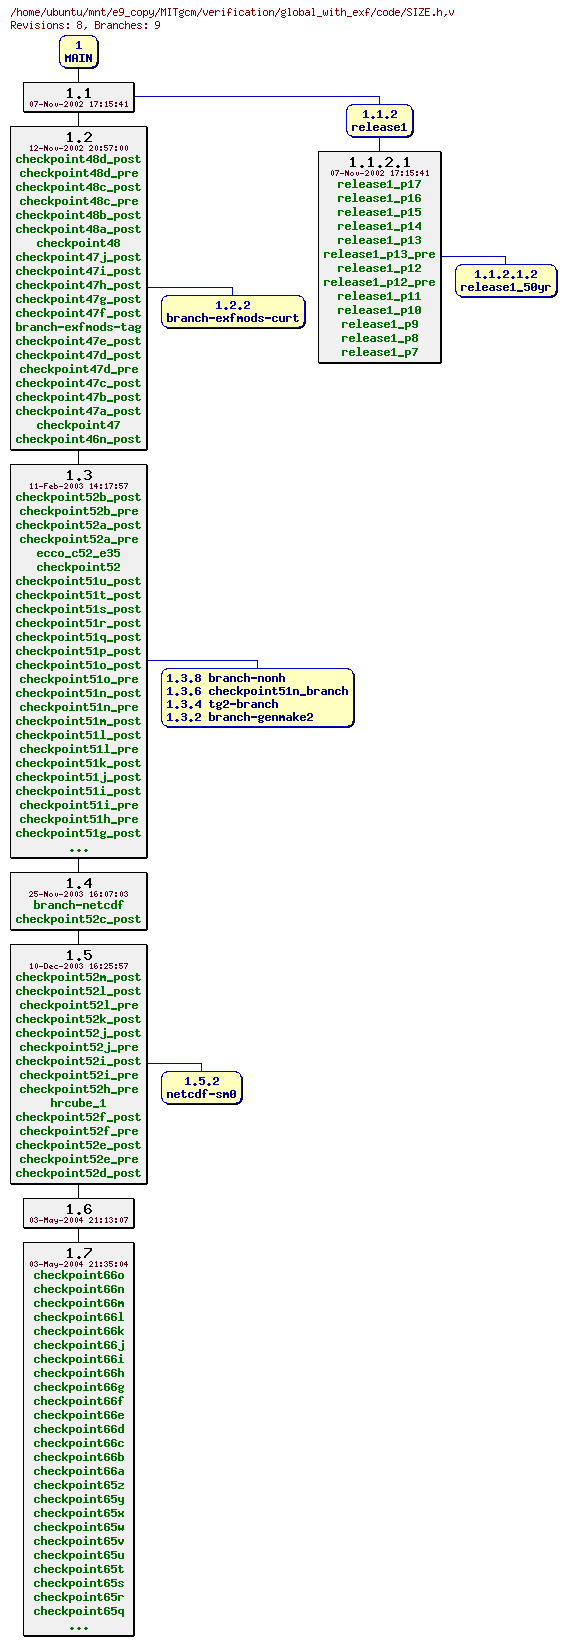 Revisions of MITgcm/verification/global_with_exf/code/SIZE.h